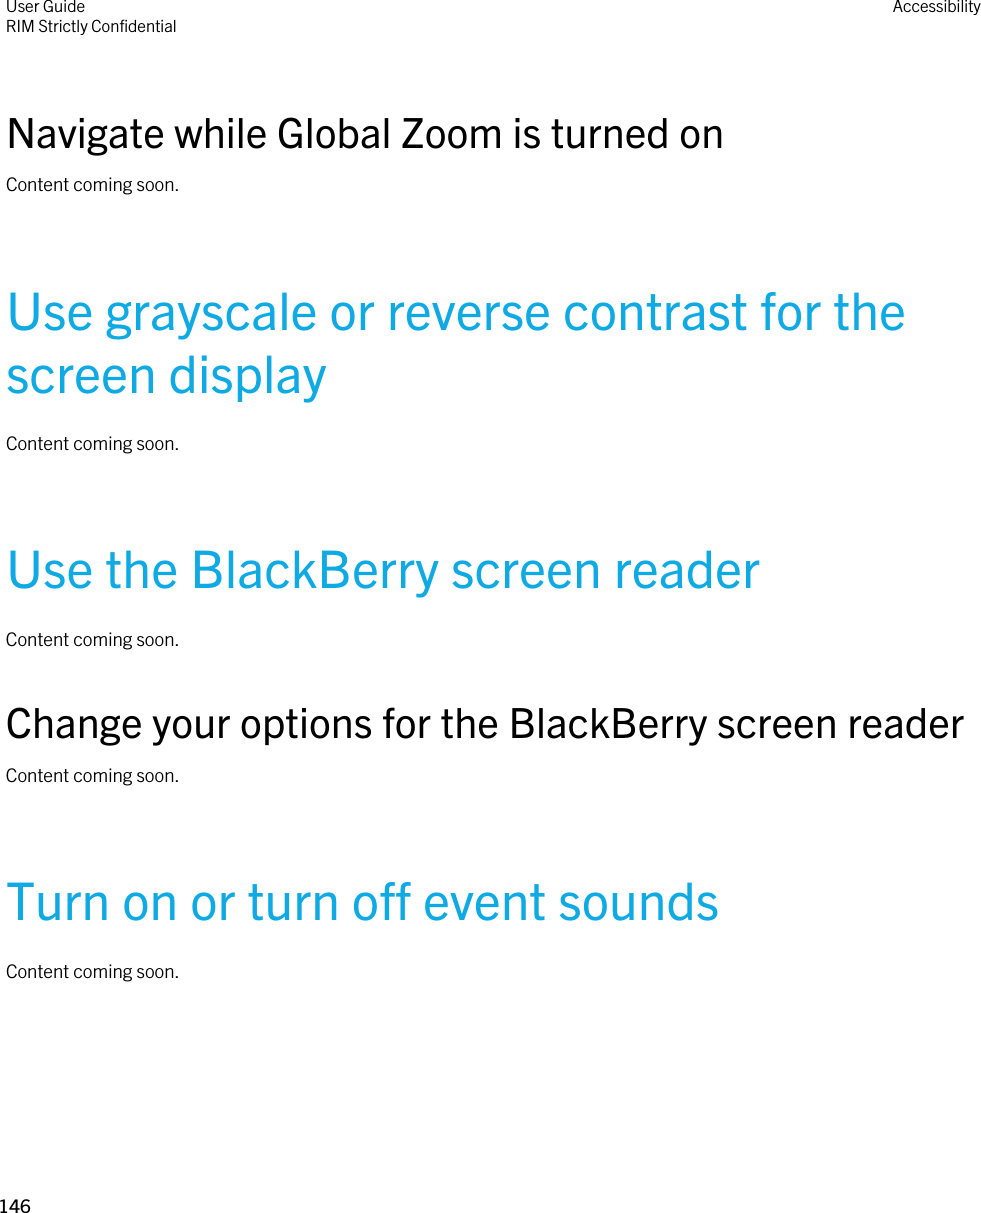 Navigate while Global Zoom is turned onContent coming soon.Use grayscale or reverse contrast for the screen displayContent coming soon.Use the BlackBerry screen readerContent coming soon.Change your options for the BlackBerry screen readerContent coming soon.Turn on or turn off event soundsContent coming soon.User GuideRIM Strictly Confidential Accessibility146 